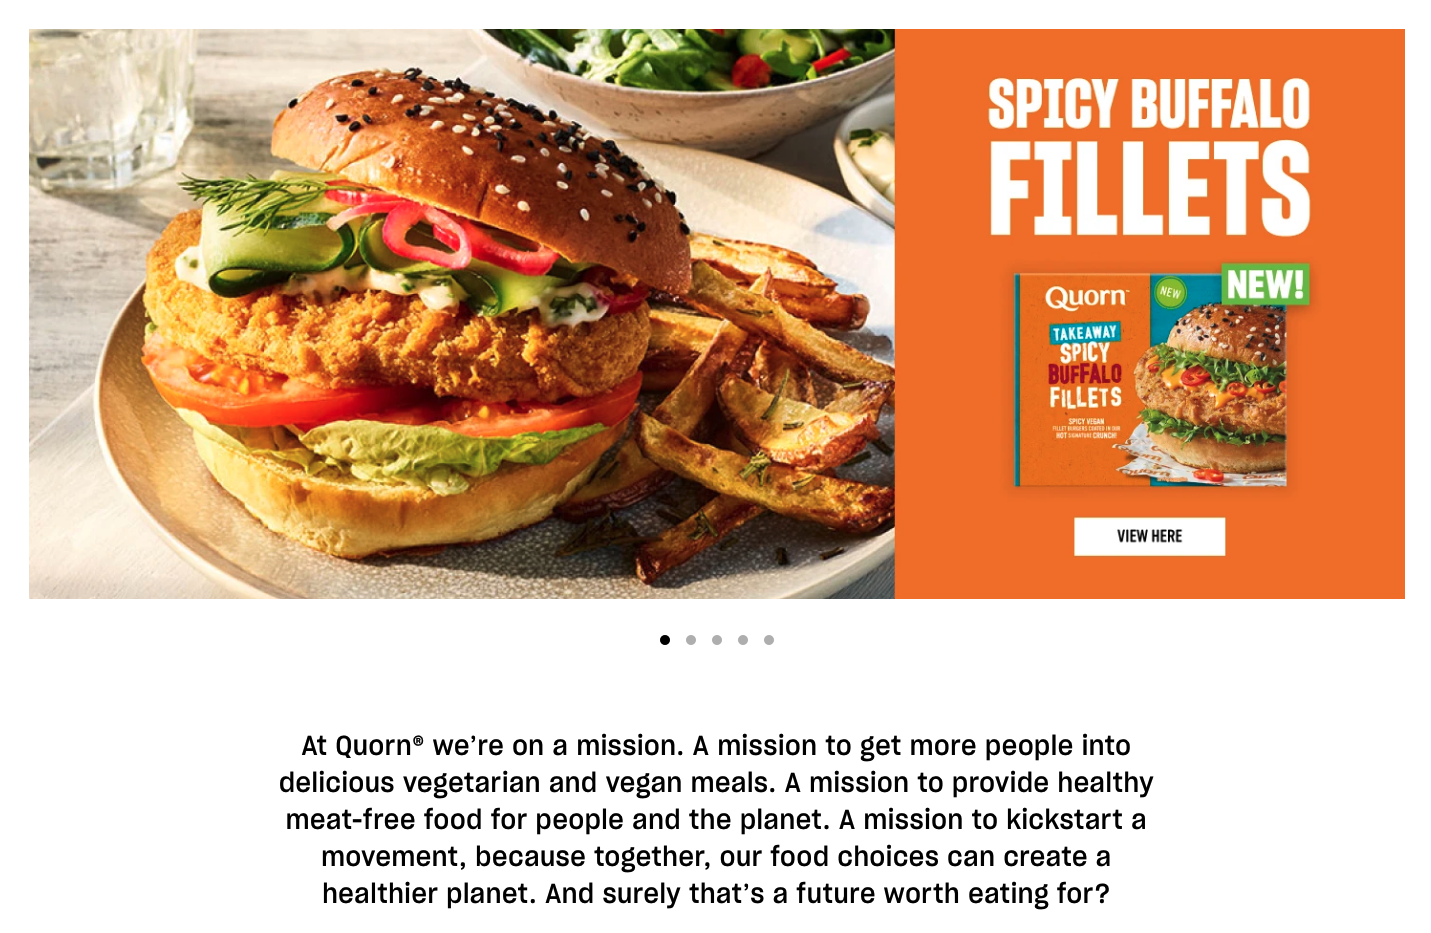 Image of the Quorn website's homepage, featuring a buffalo quorn fillet burger and text